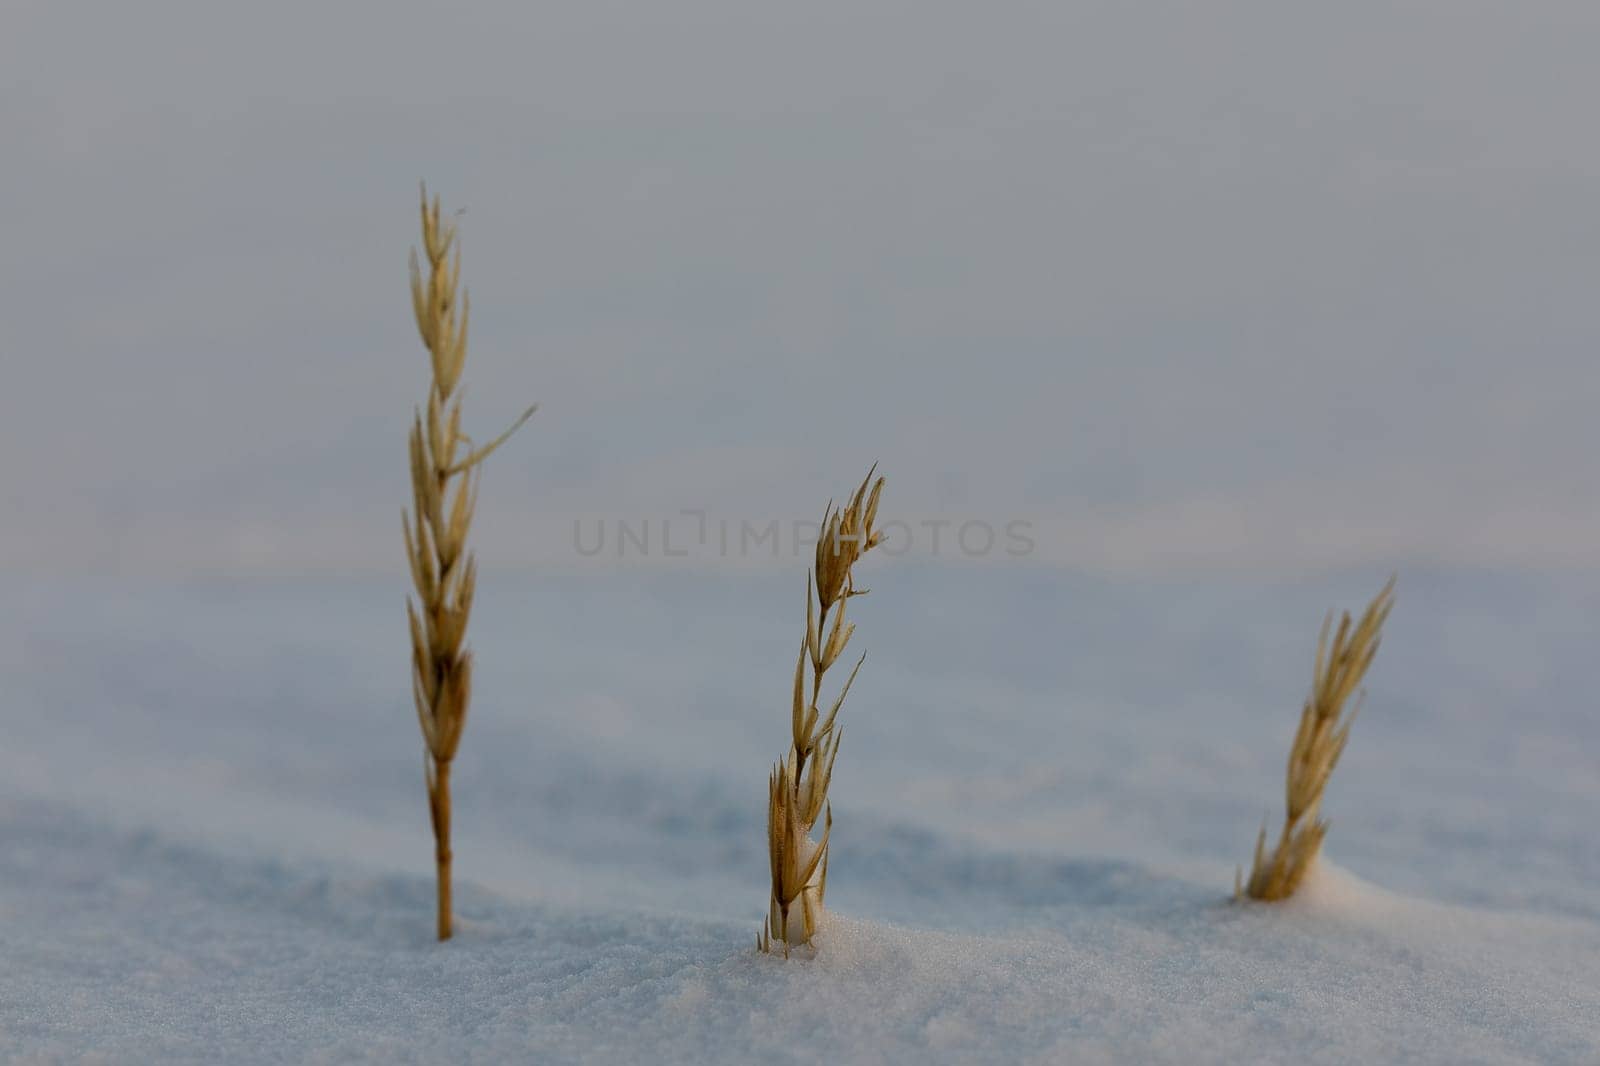 Close-up of sea lyme grass, Leymus arenarius, covered in a snow scene, near Arviat, Nunavut, Canada